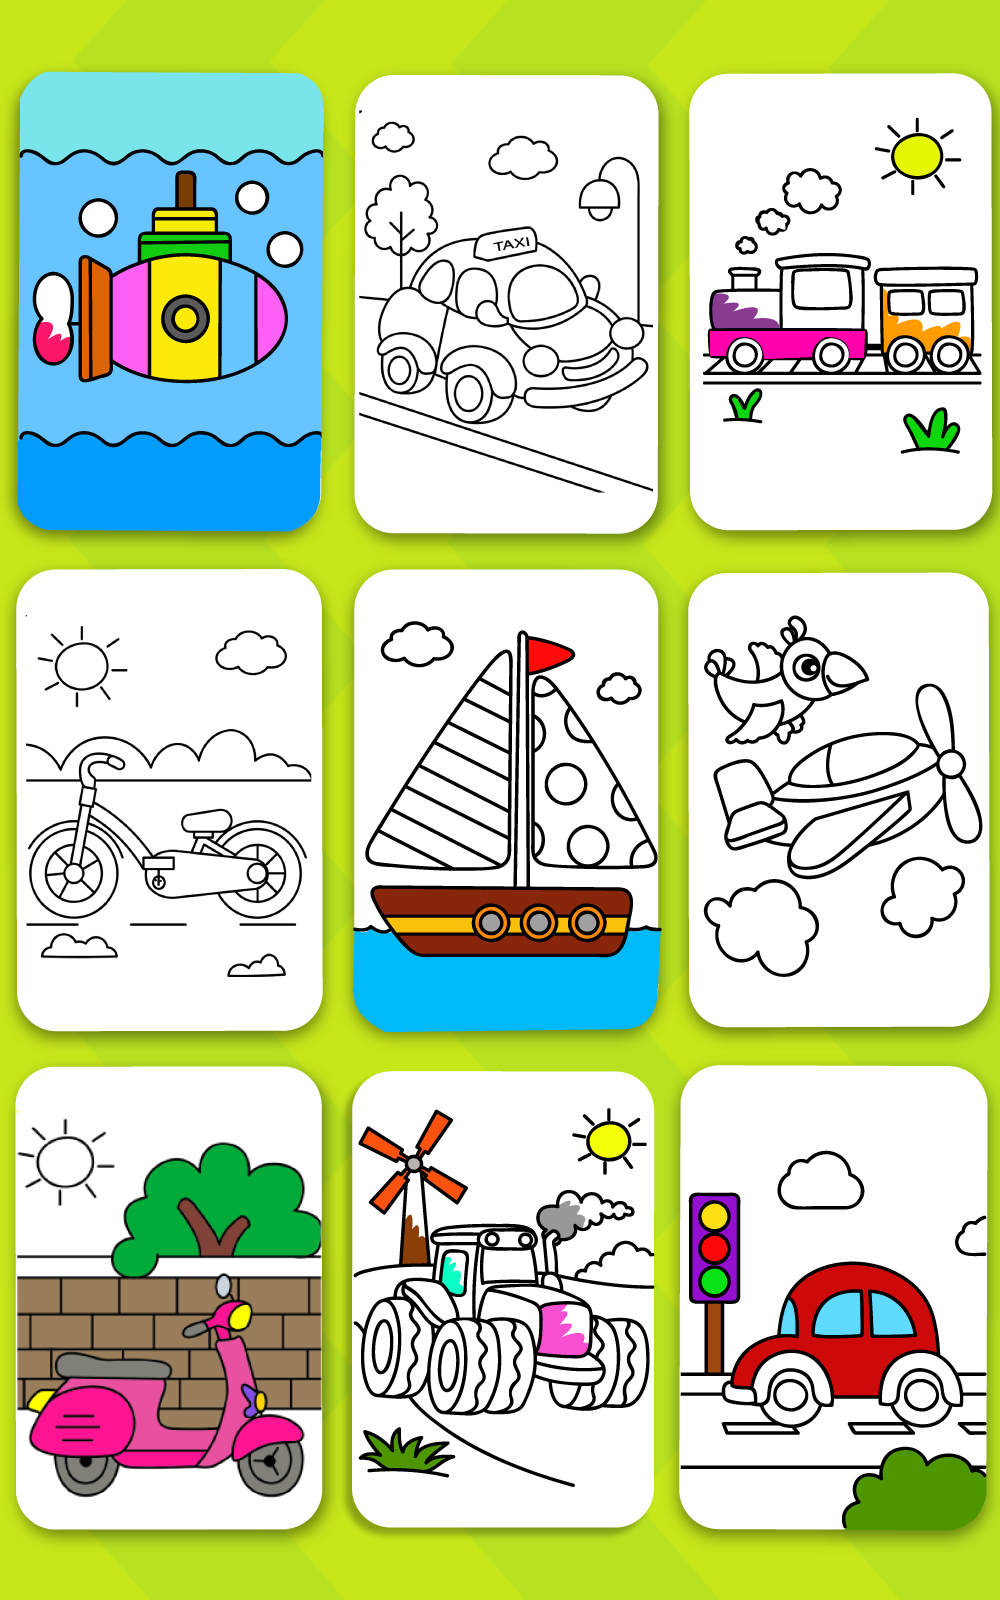 Cars Coloring Book for Kids - Doodle, Paint & Draw遊戲截圖